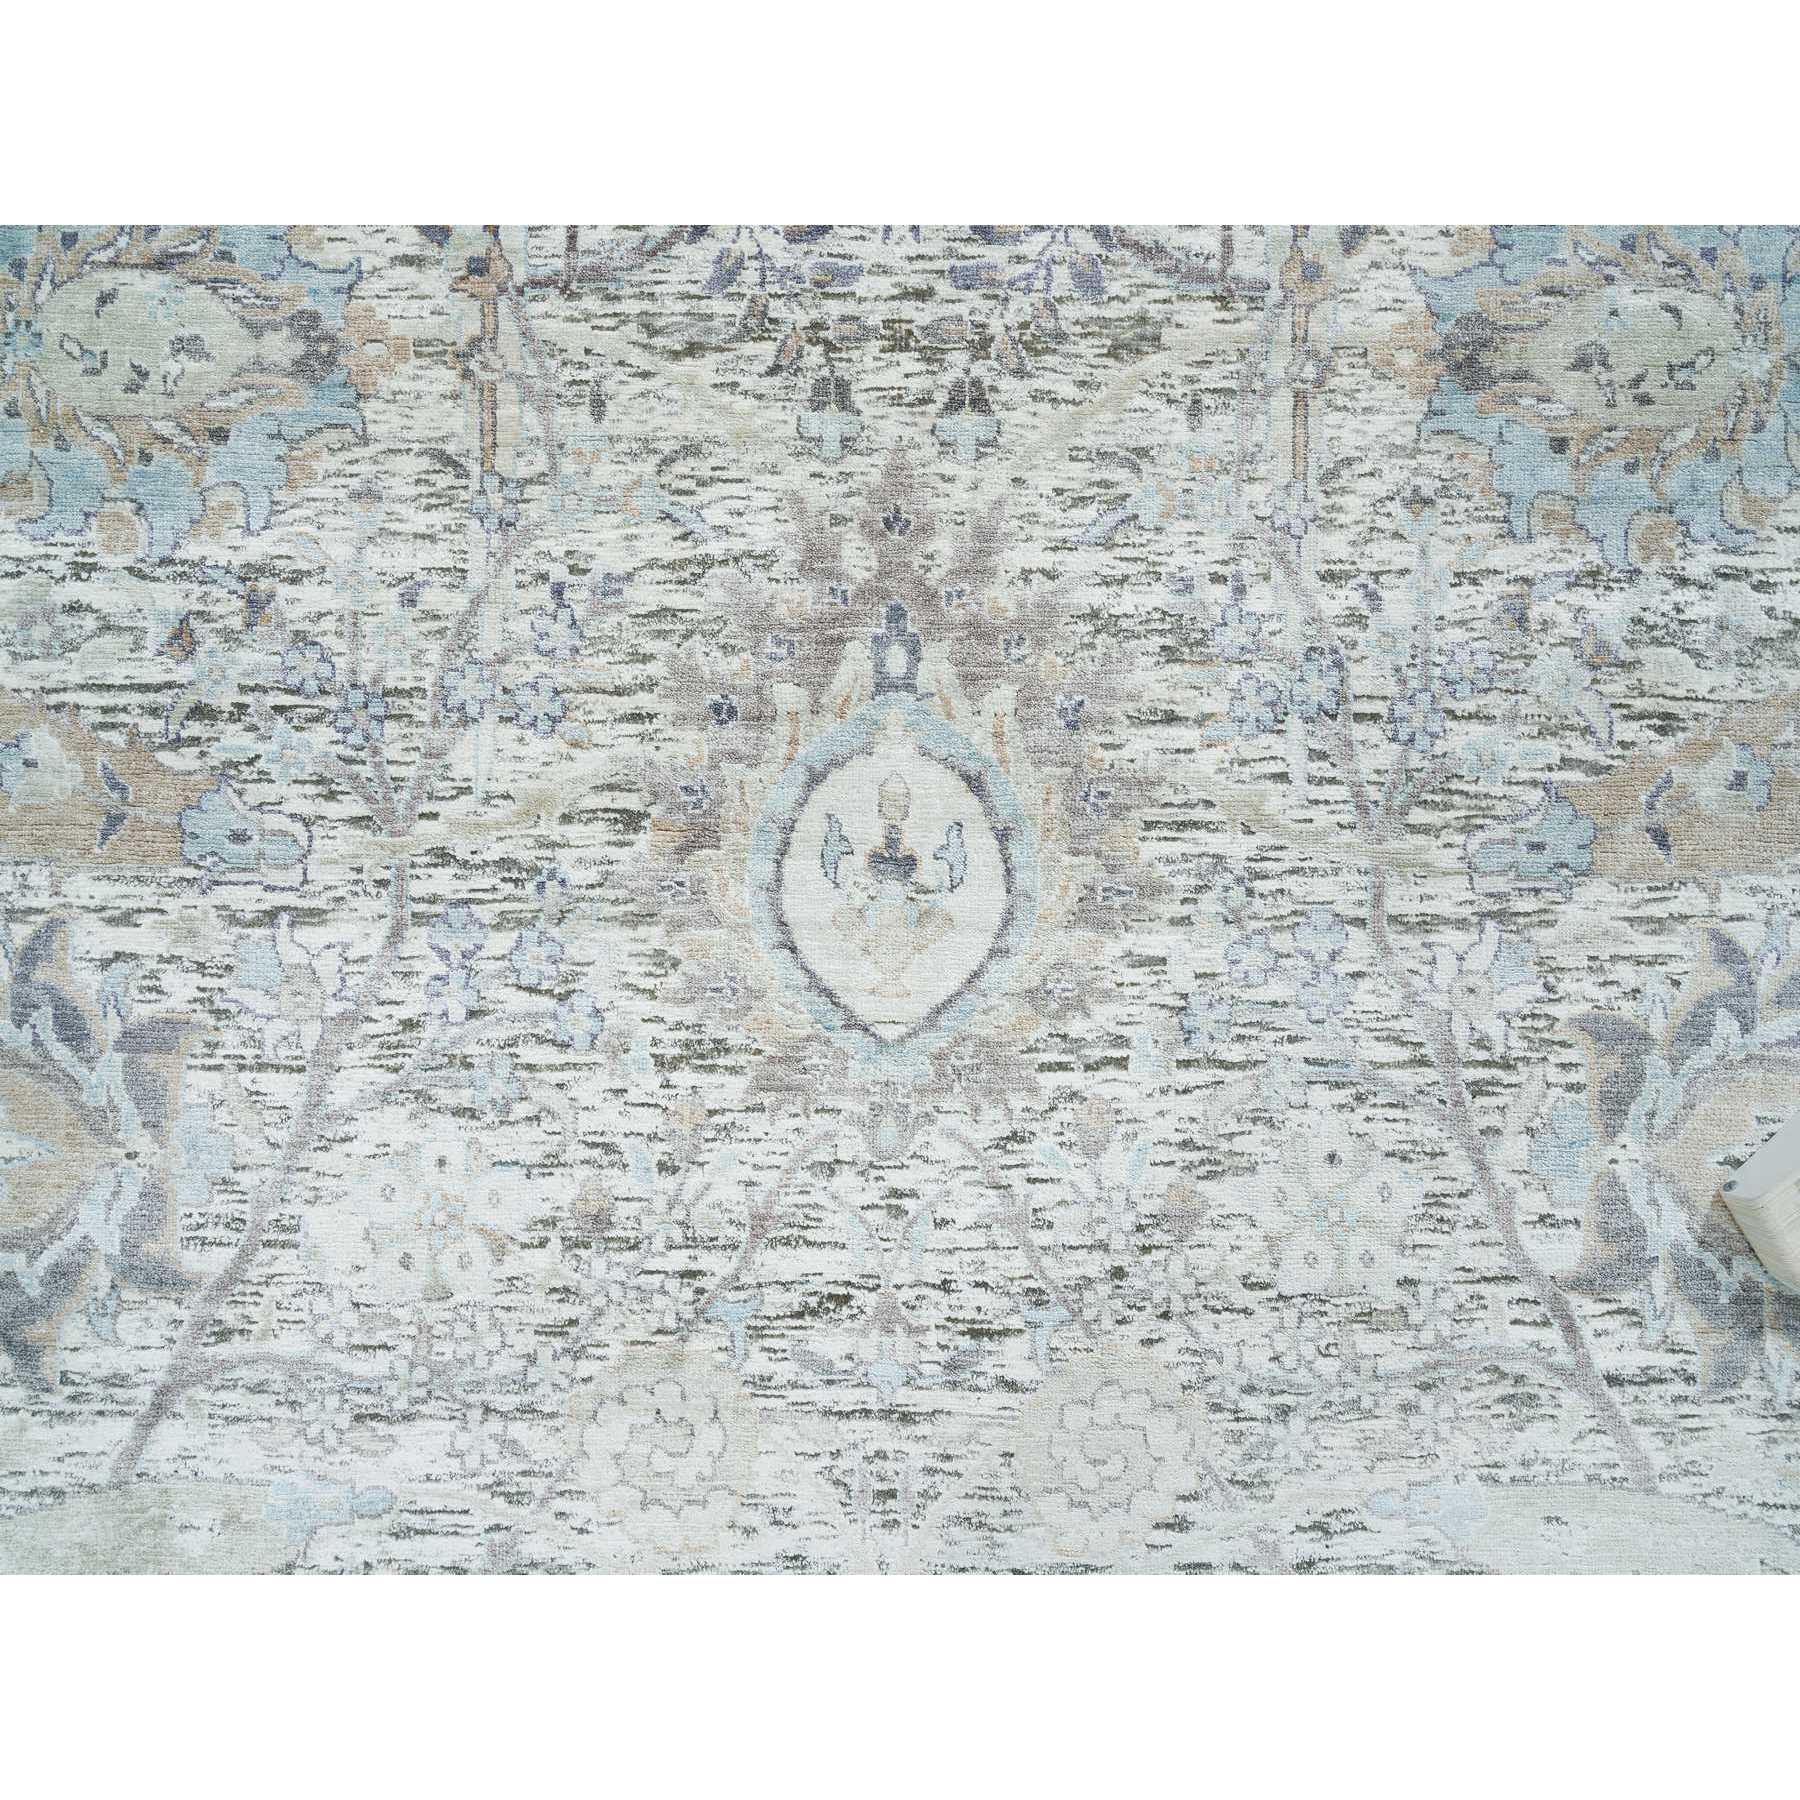 8'x10'1" Ivory, Sickle Leaf Design Soft Pile, Silk With Textured Wool Hand Woven, Oriental Rug 